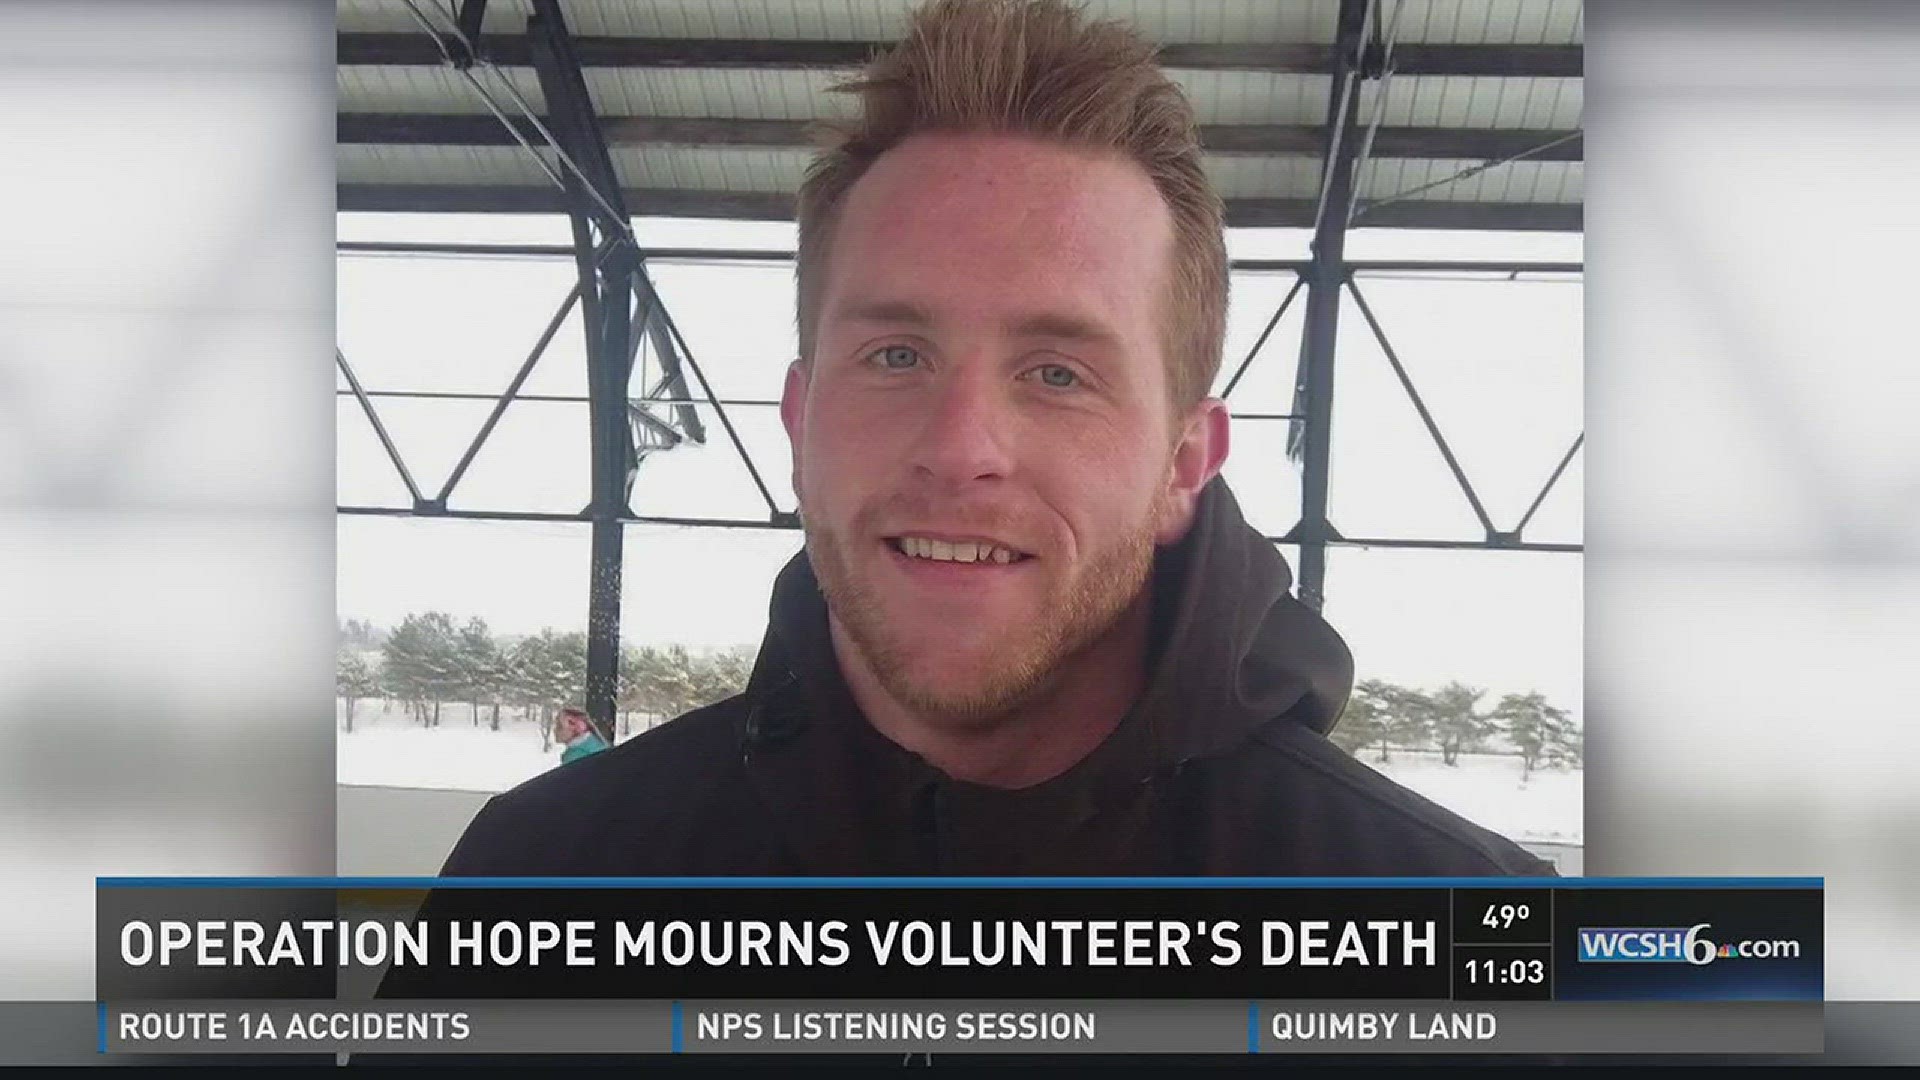 Loss of Operation HOPE volunteer mourned.